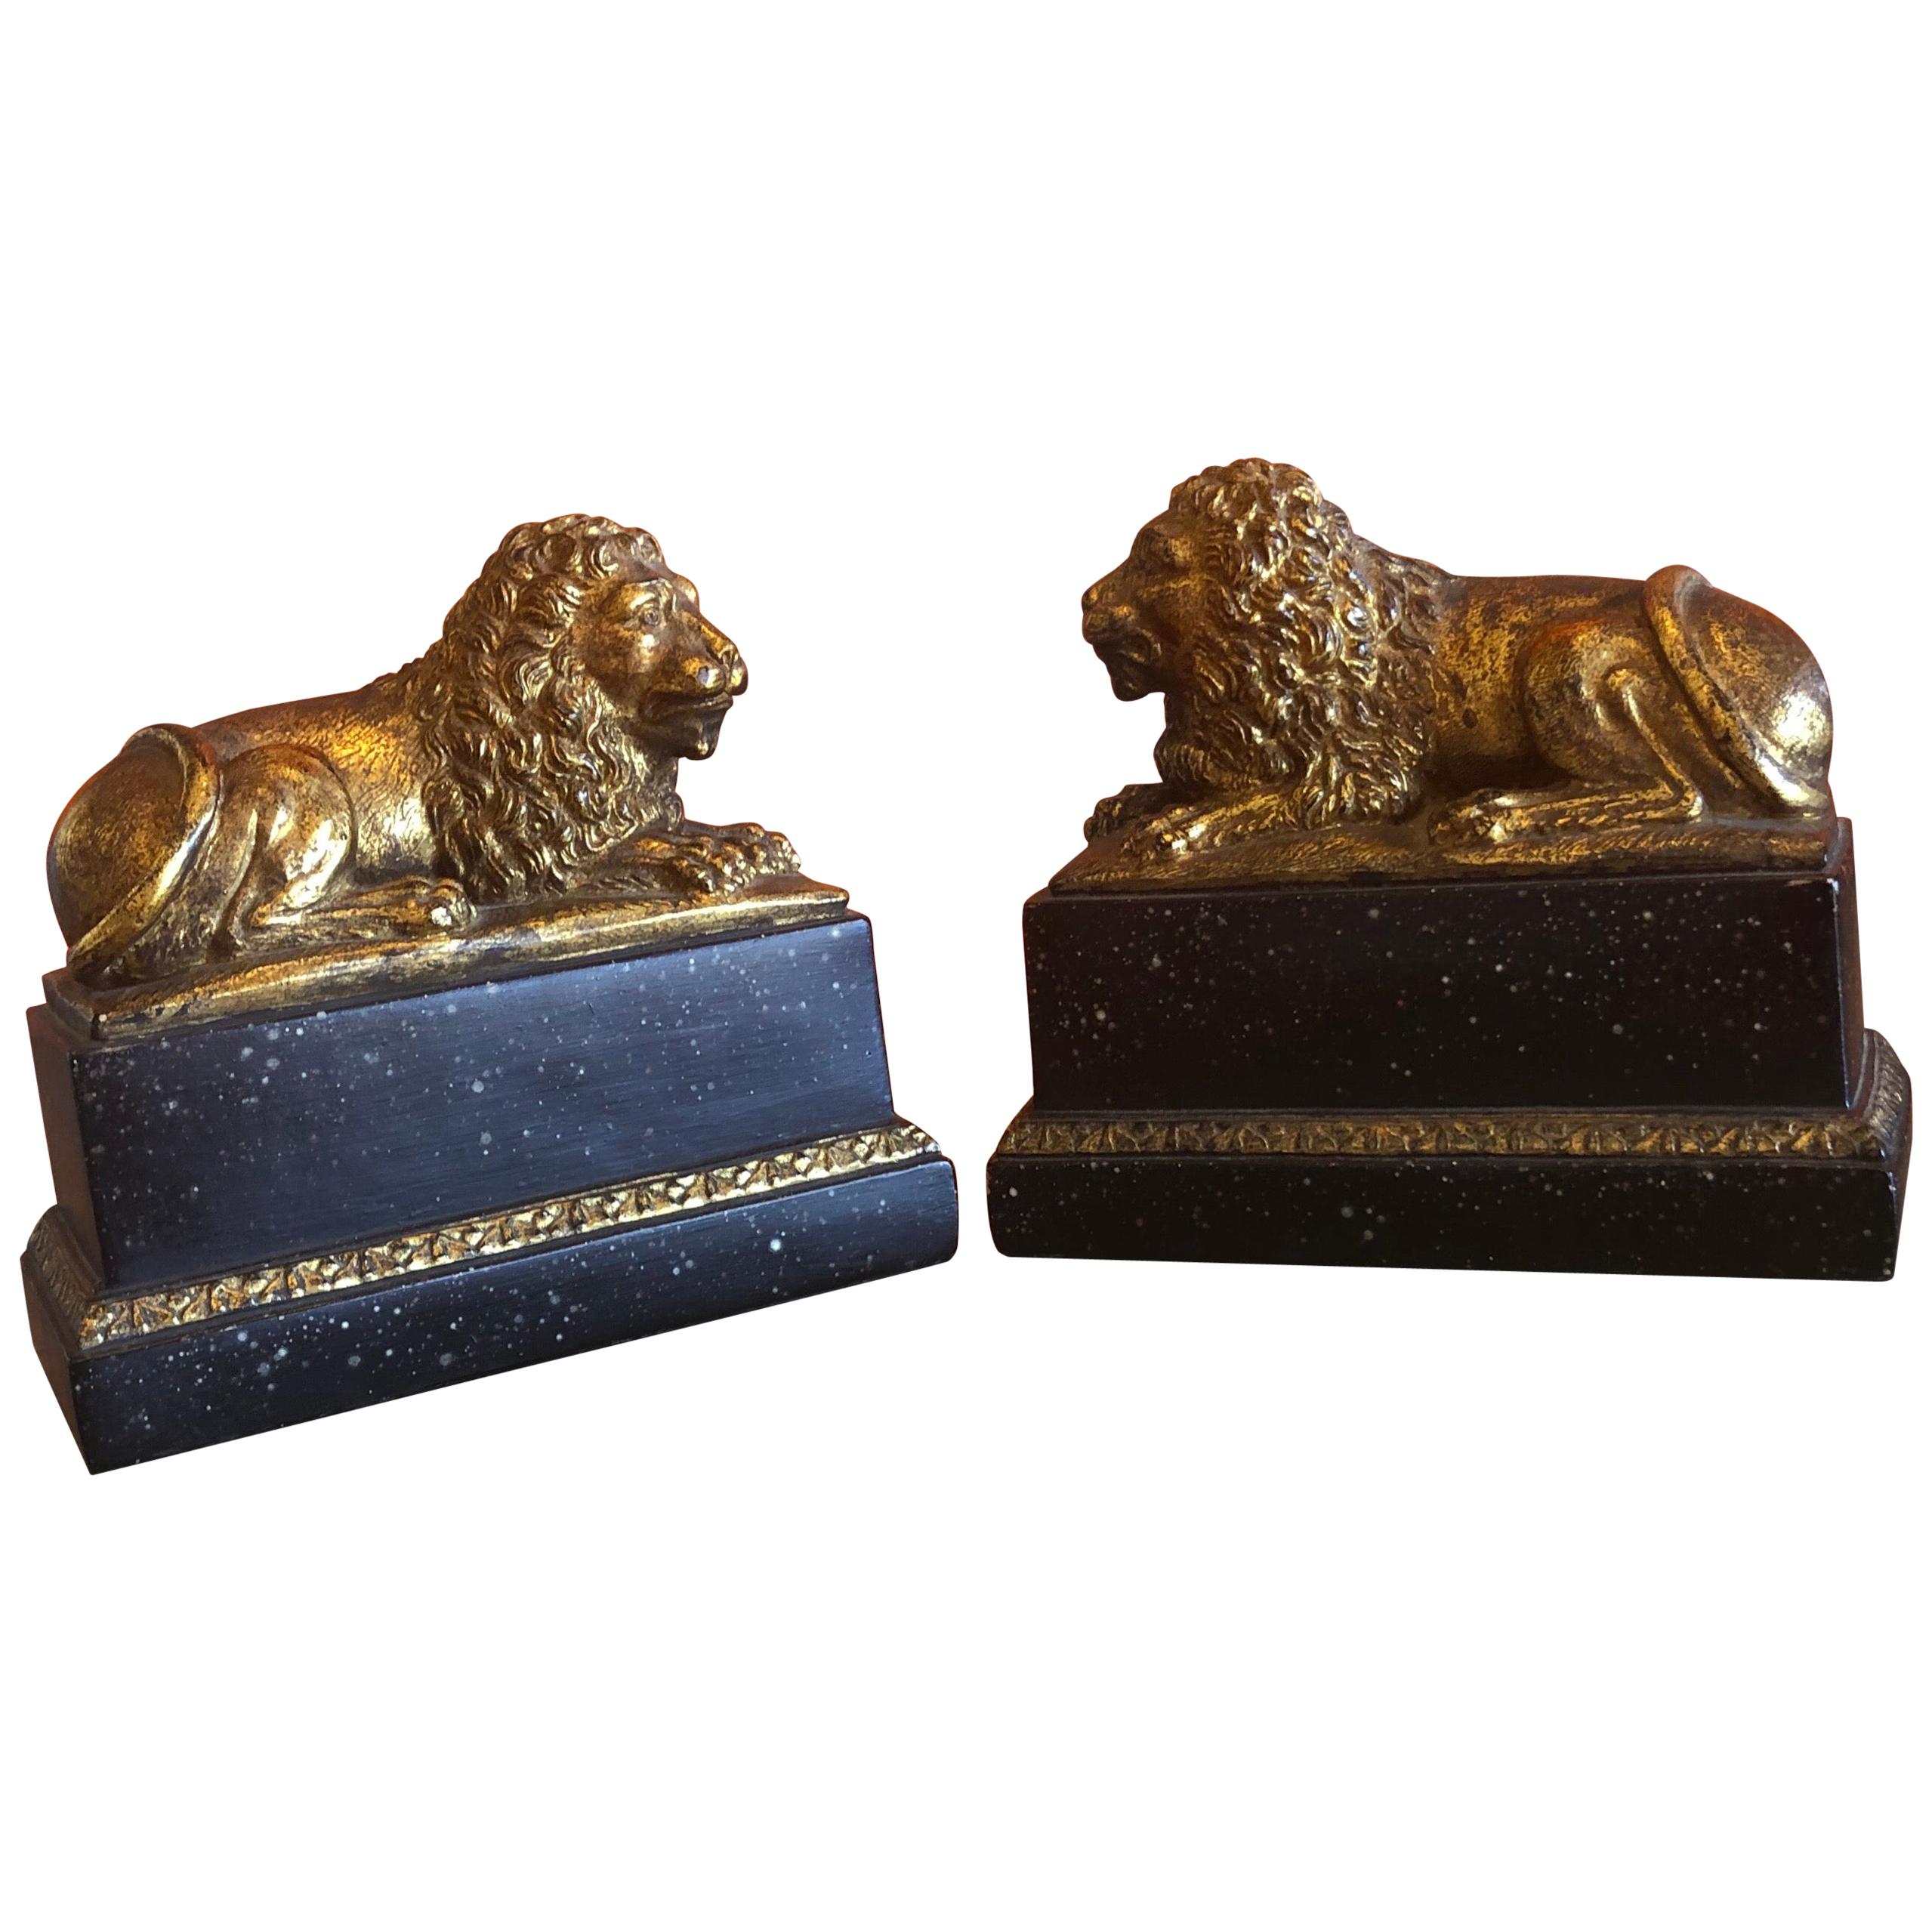 Pair of Hollywood Regency Gold Gilt Lion Bookends by Borghese